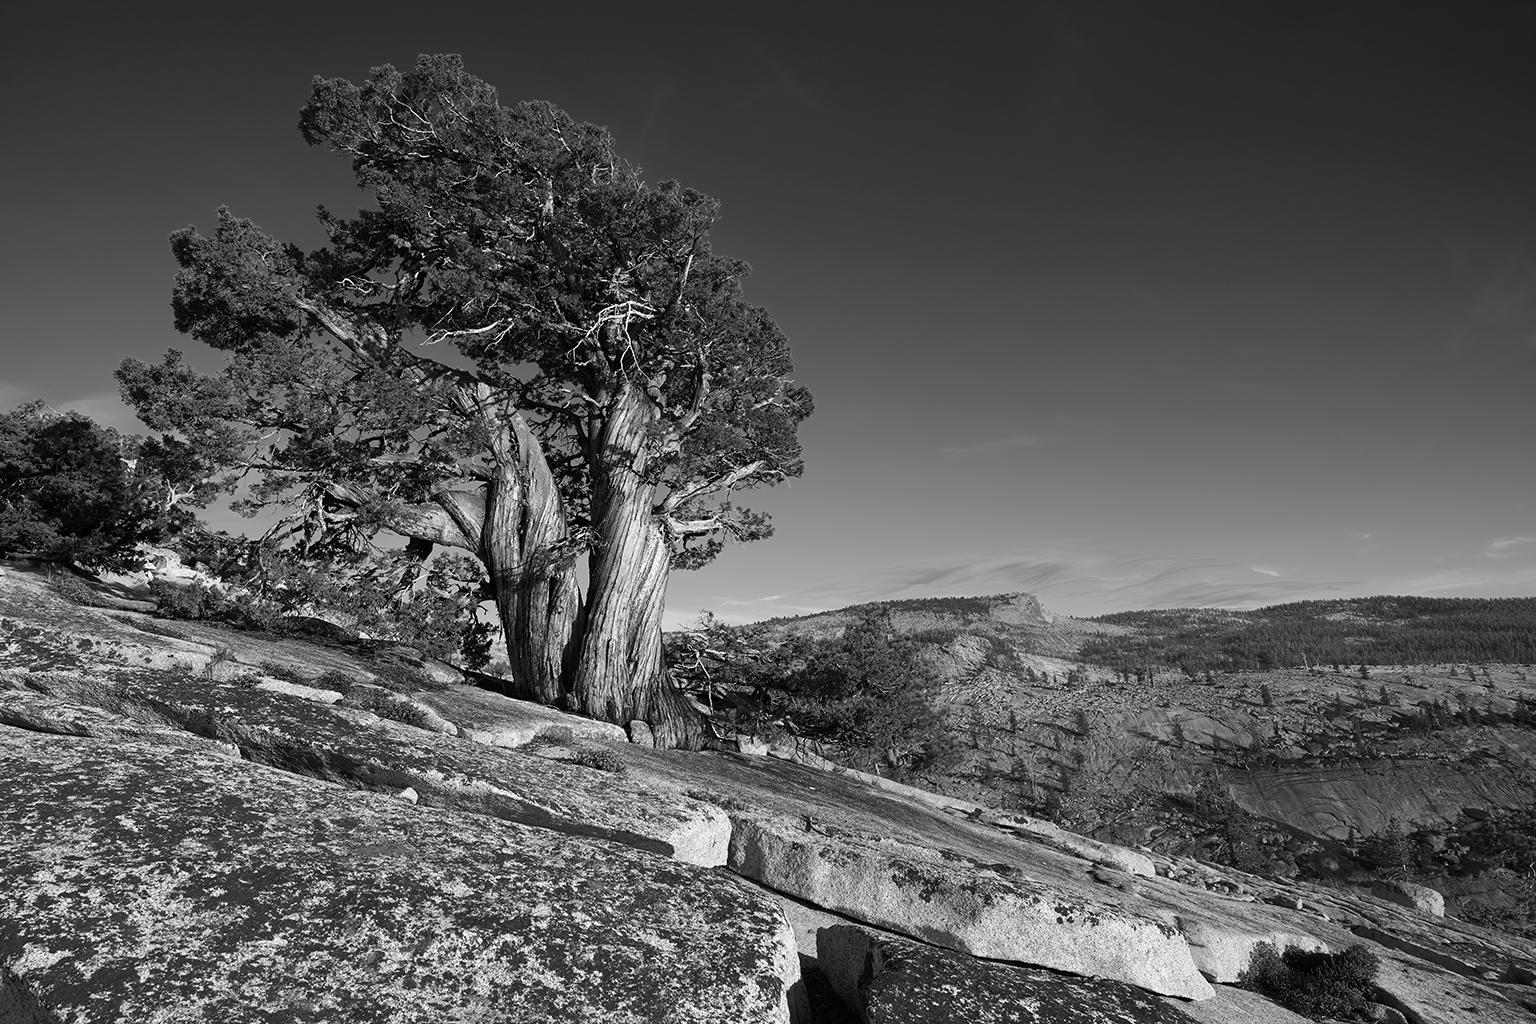 Frank Schott Black and White Photograph - Tree Study II - large scale photograph of dramatic mountain landscape